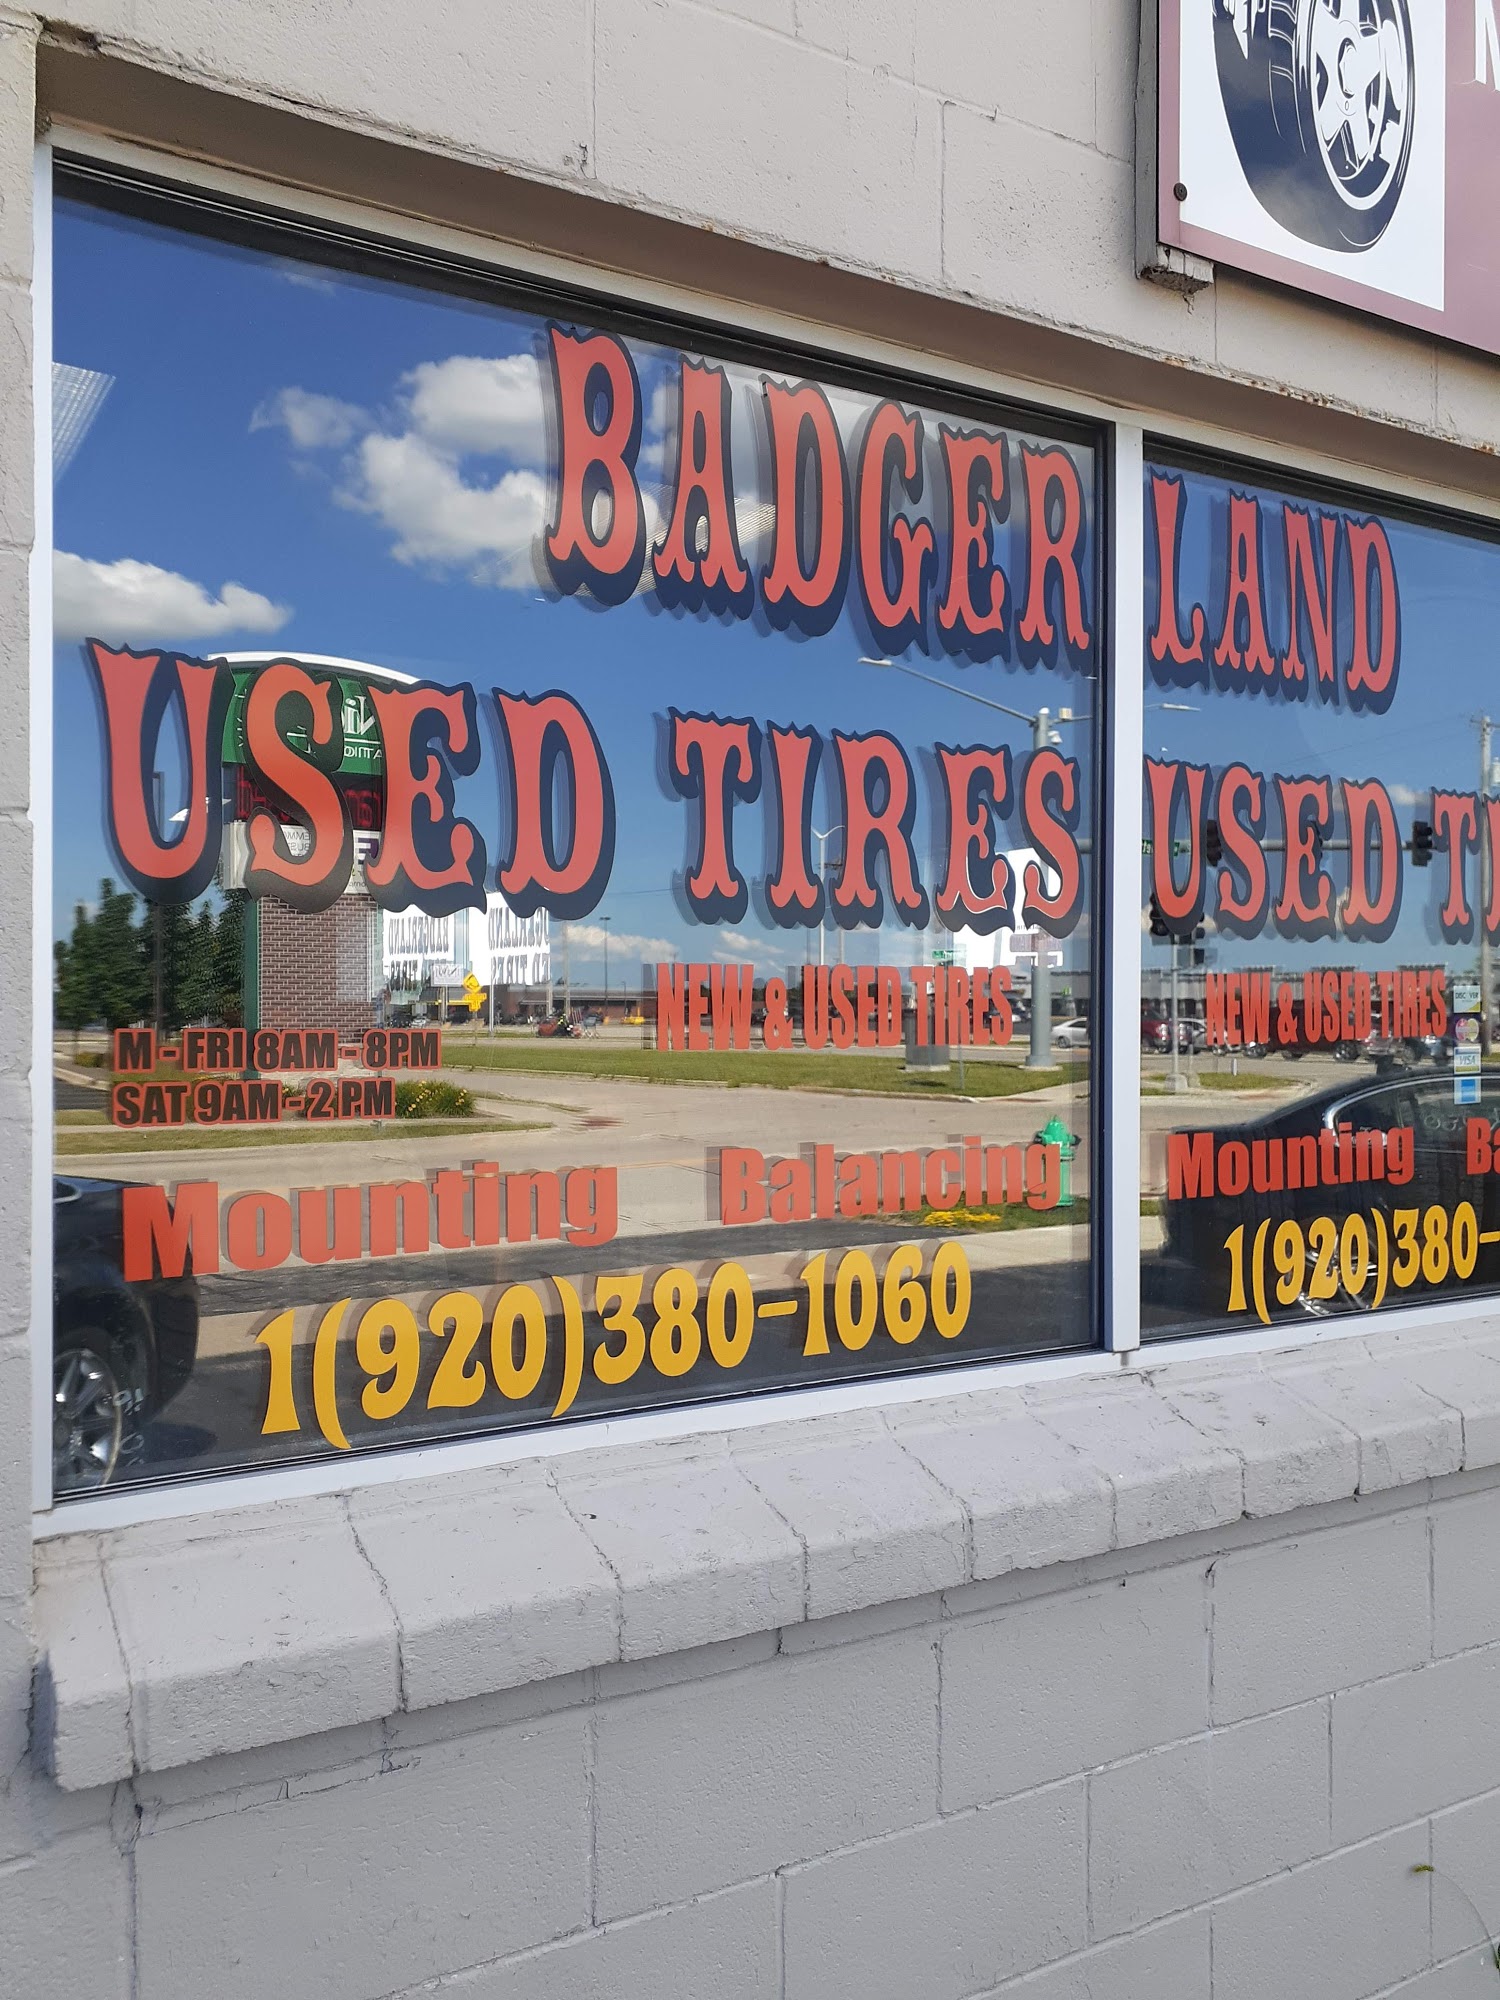 Badgerland New & Used Tires